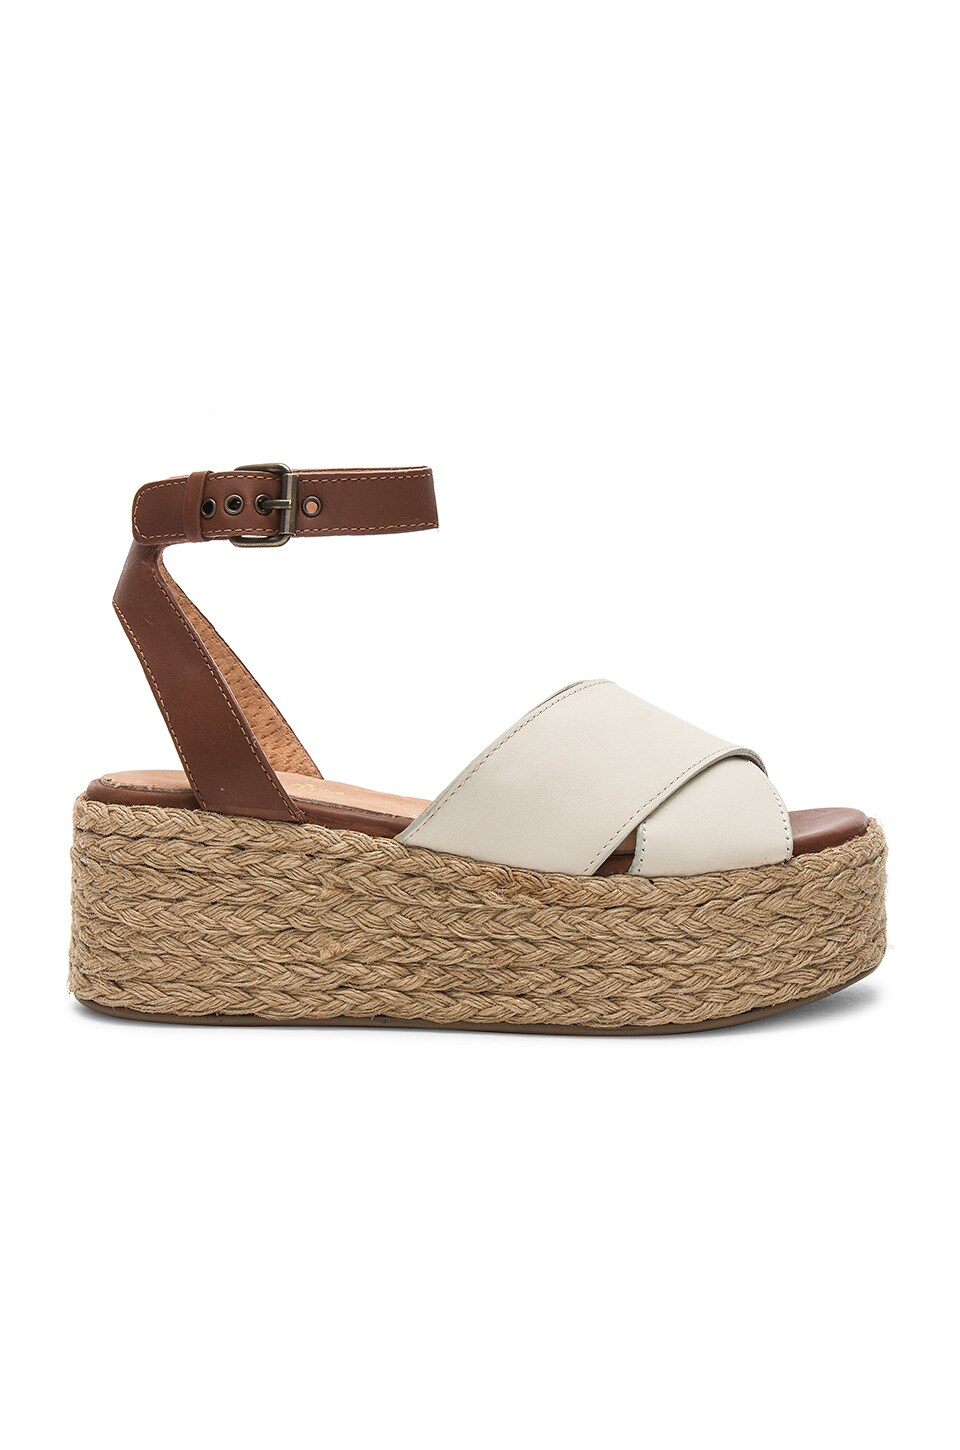 Seychelles Much Publicized Sandal in White Leather | REVOLVE